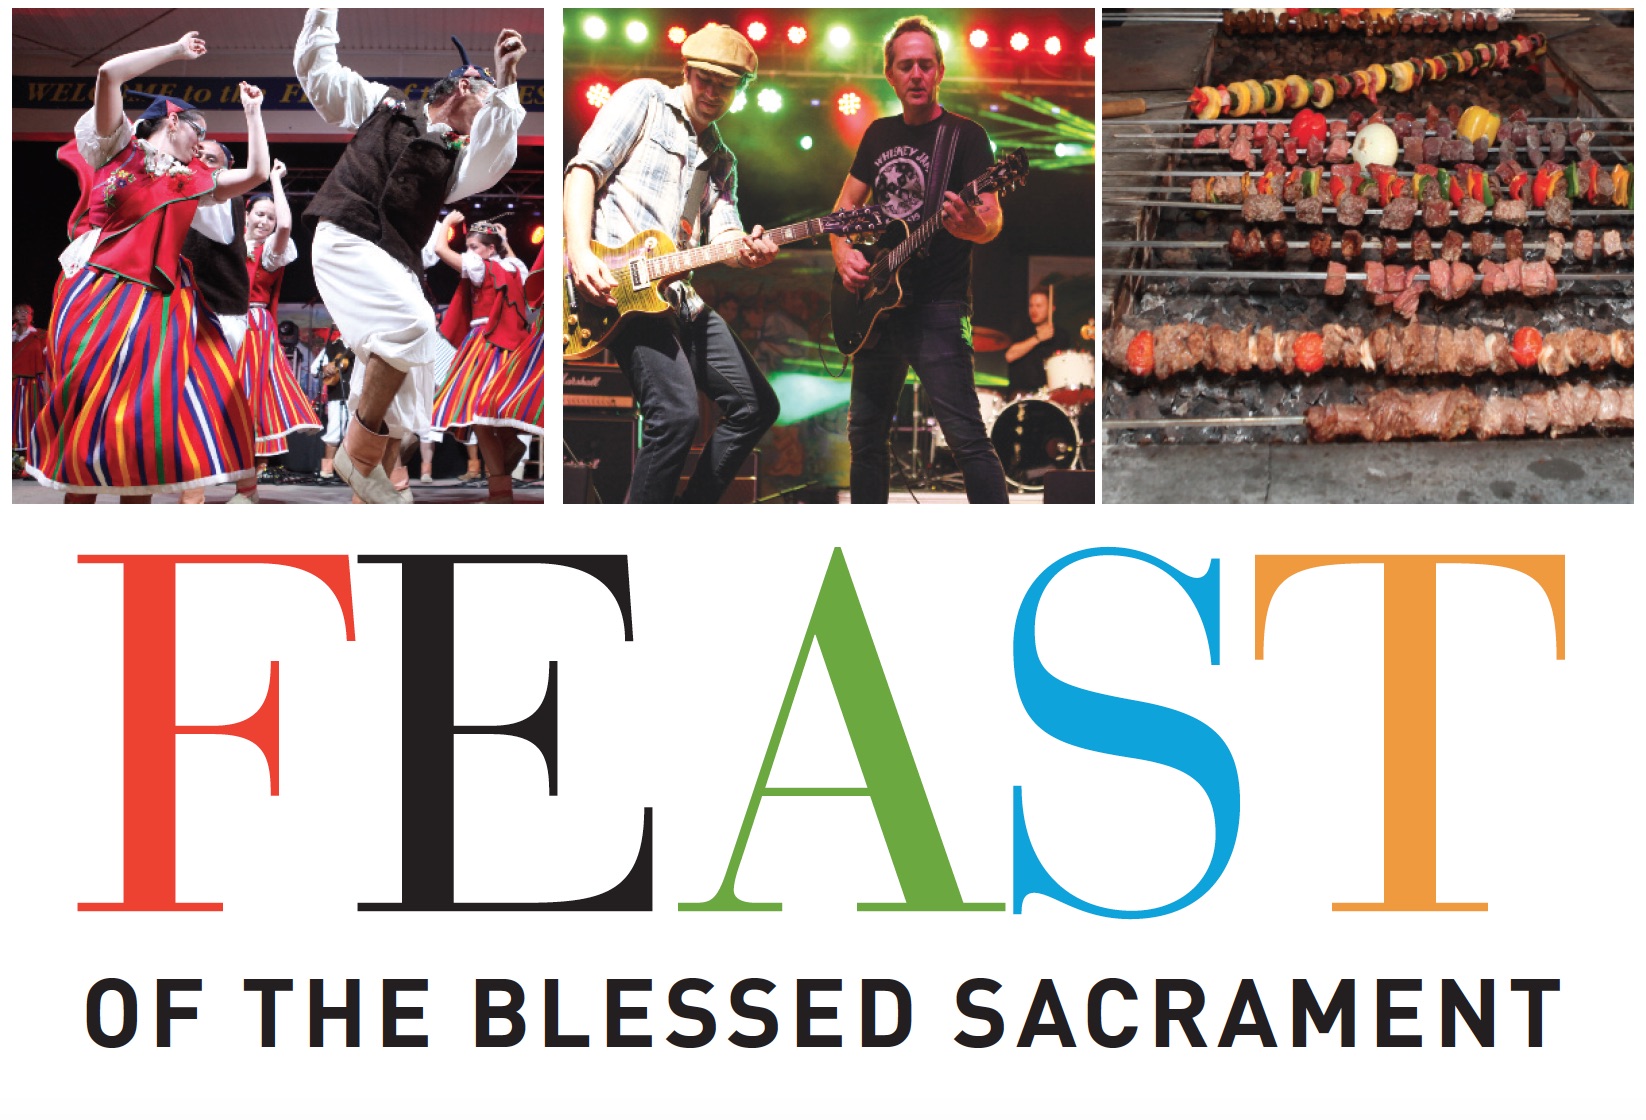 Feast of the Blessed Sacrament 2017 Destination New Bedford